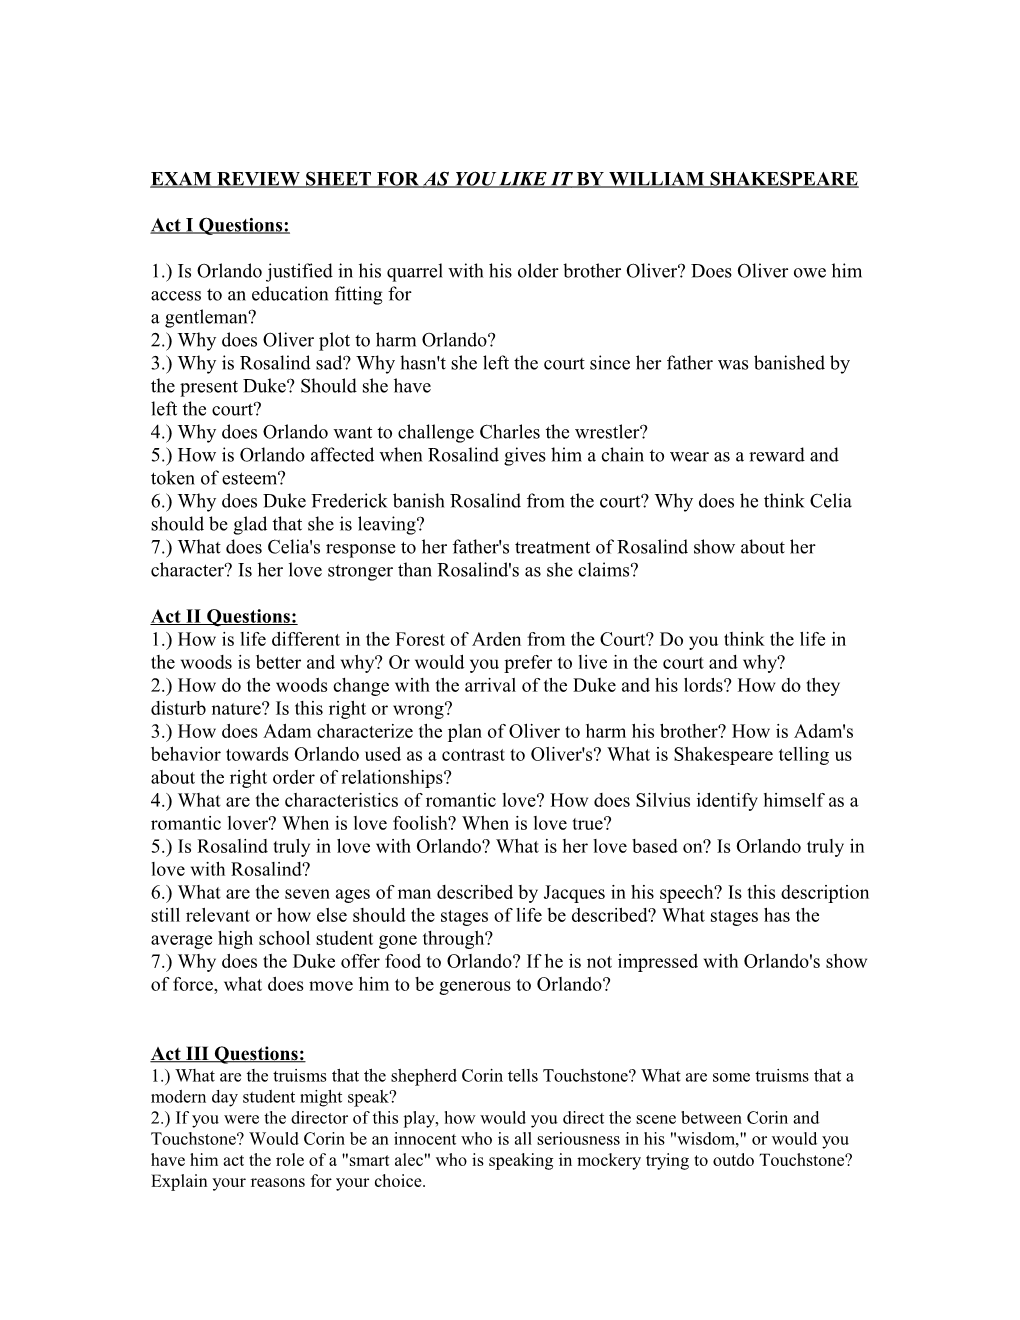 Exam Review Sheet for As You Like It by William Shakespeare